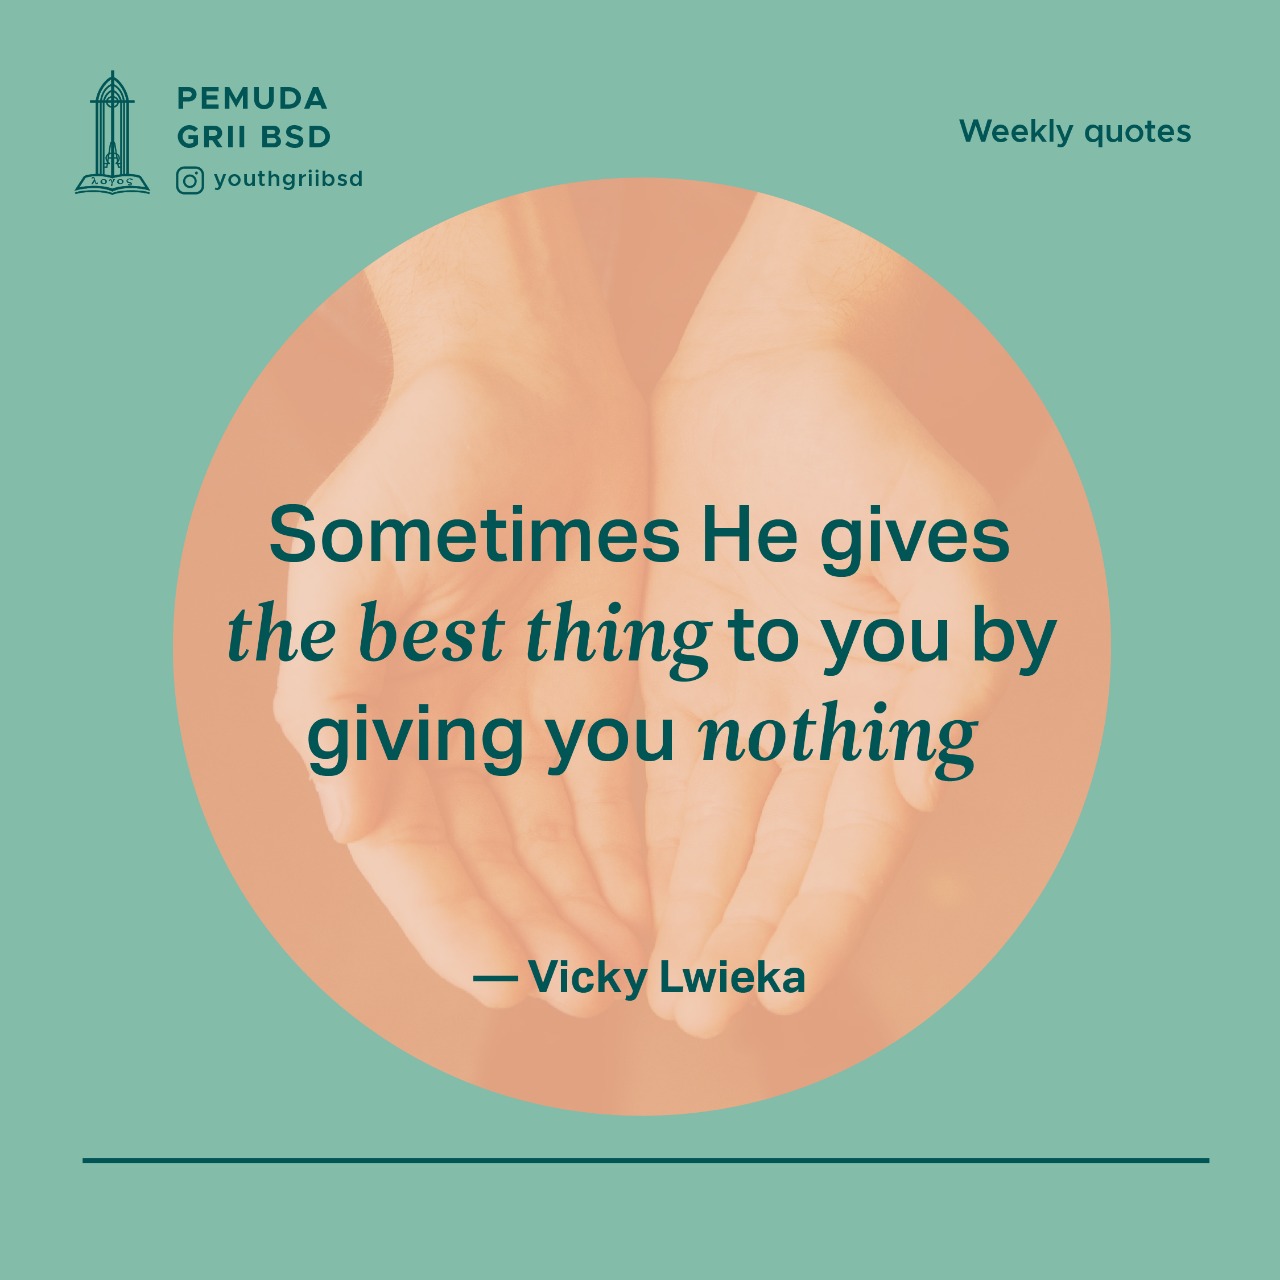 Sometimes He gives the best thing to you by giving you nothing.